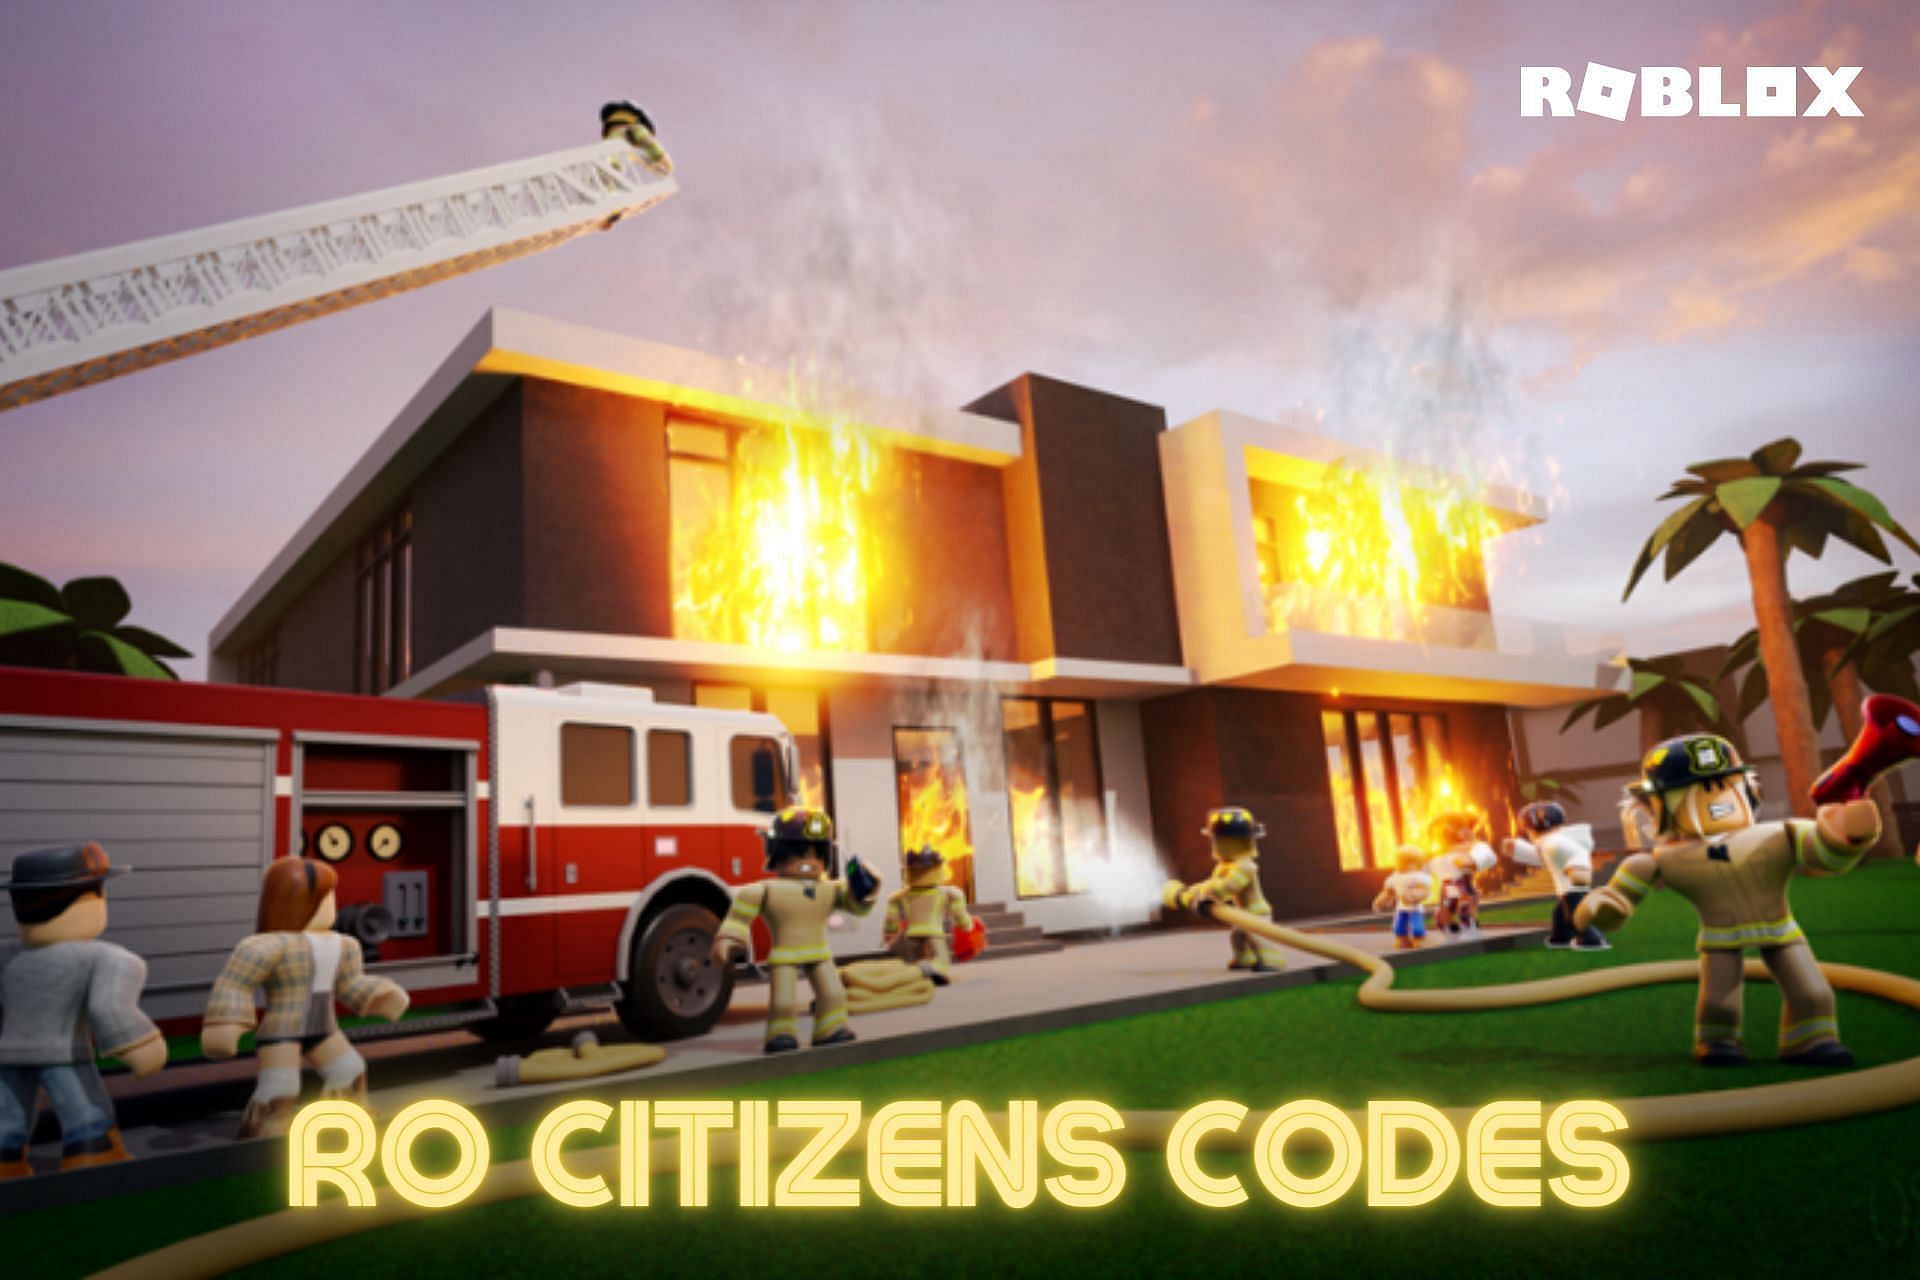 Roblox RoCitizens codes (January 2023) Free Cash, Trophy, and more